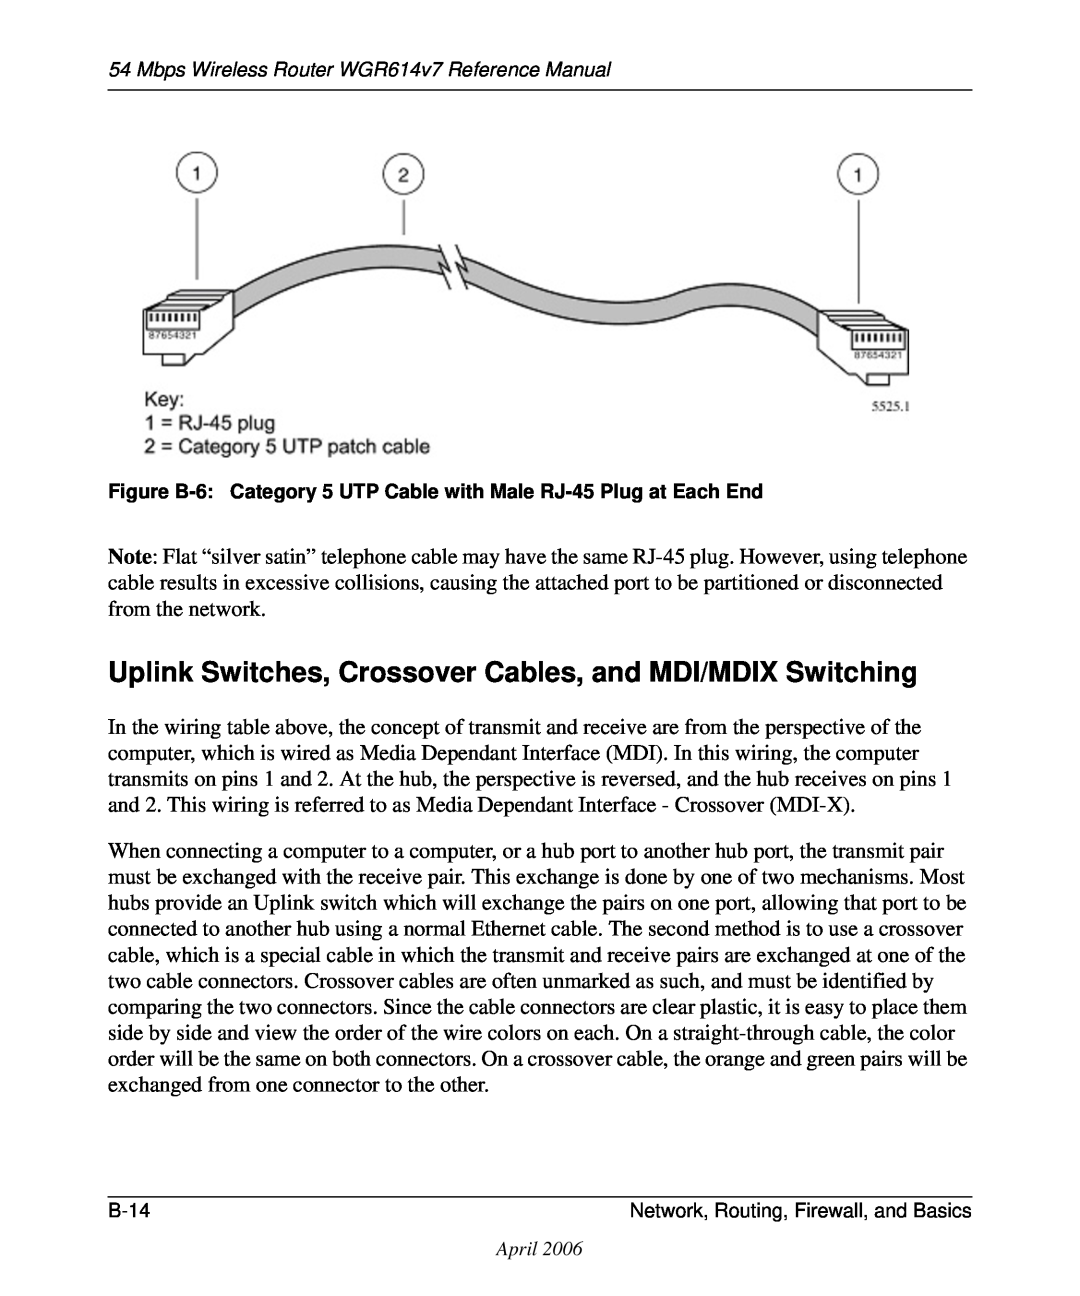 NETGEAR WGR614v7 manual Uplink Switches, Crossover Cables, and MDI/MDIX Switching 